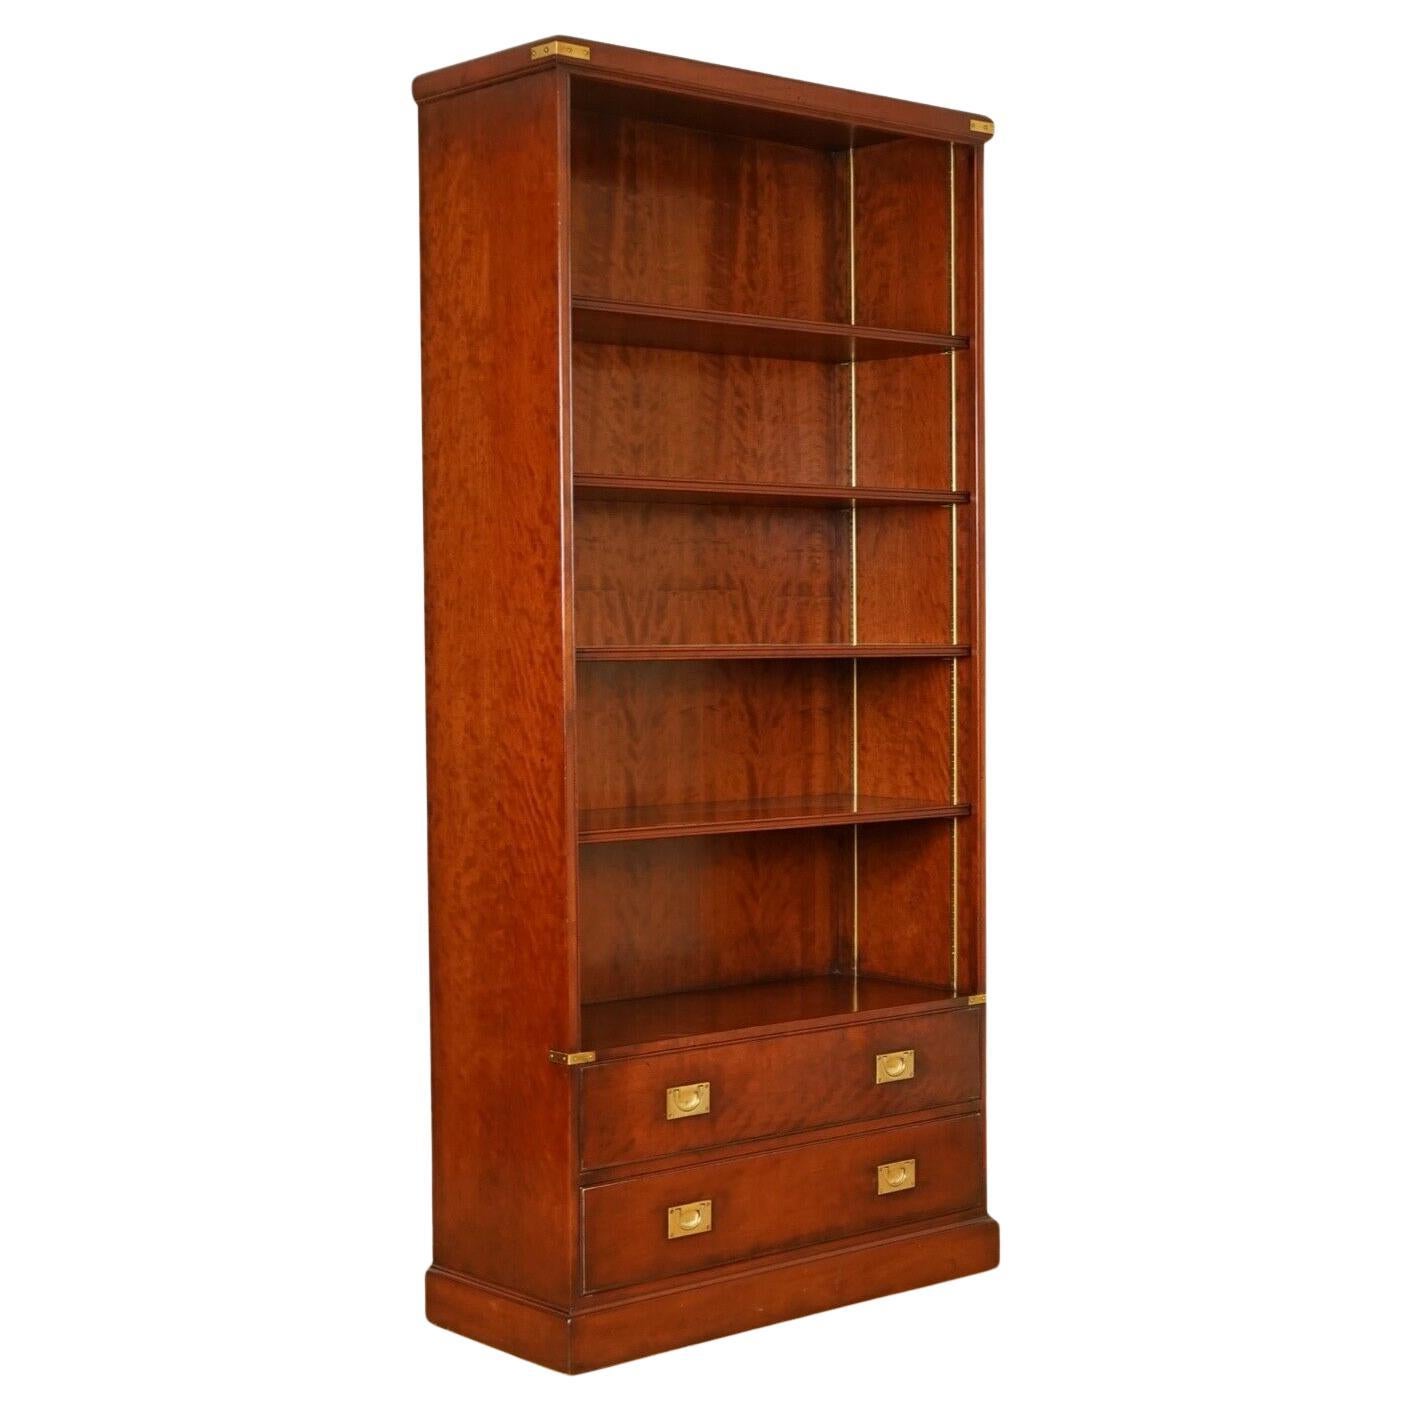 Stunning Kennedy Furniture Military Campaign Bookcase with 2 Drawers